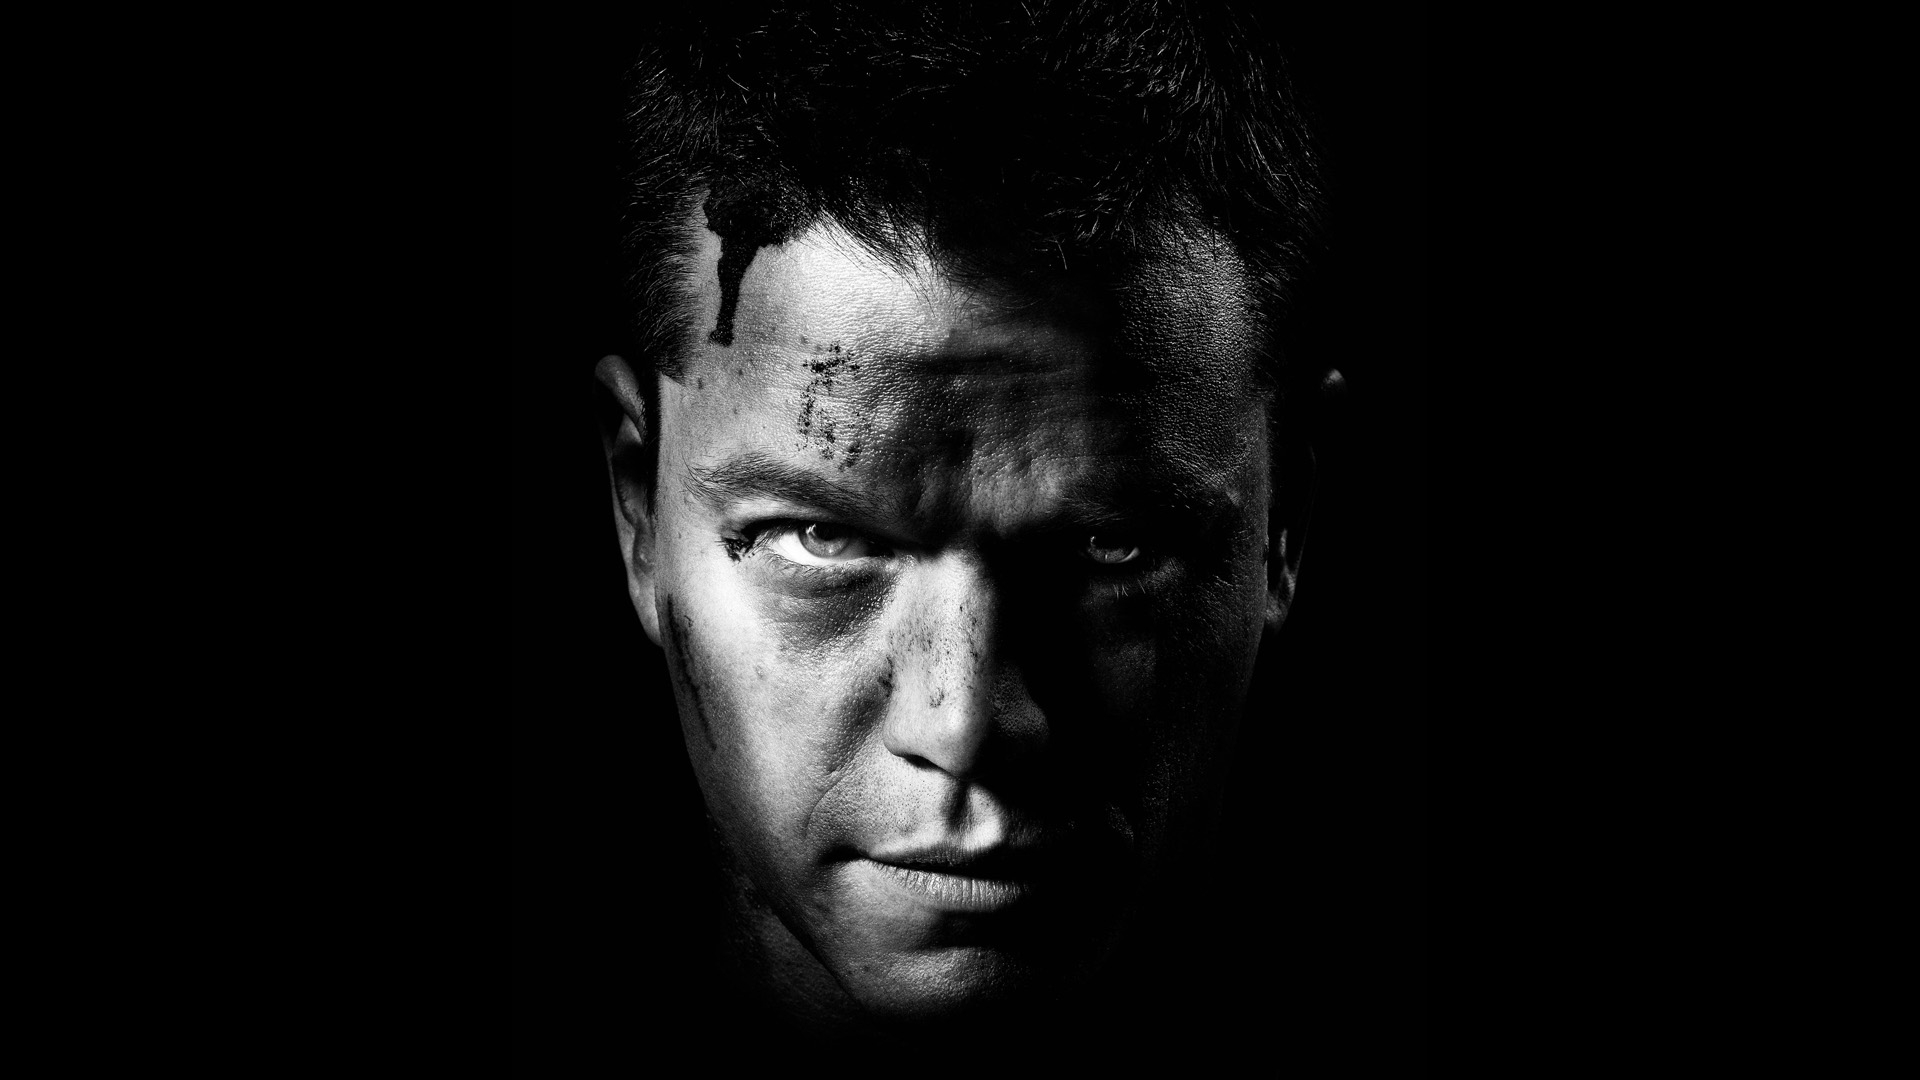 Top jason bourne background Download Book Source for free download HD, 4K & high quality wallpaper